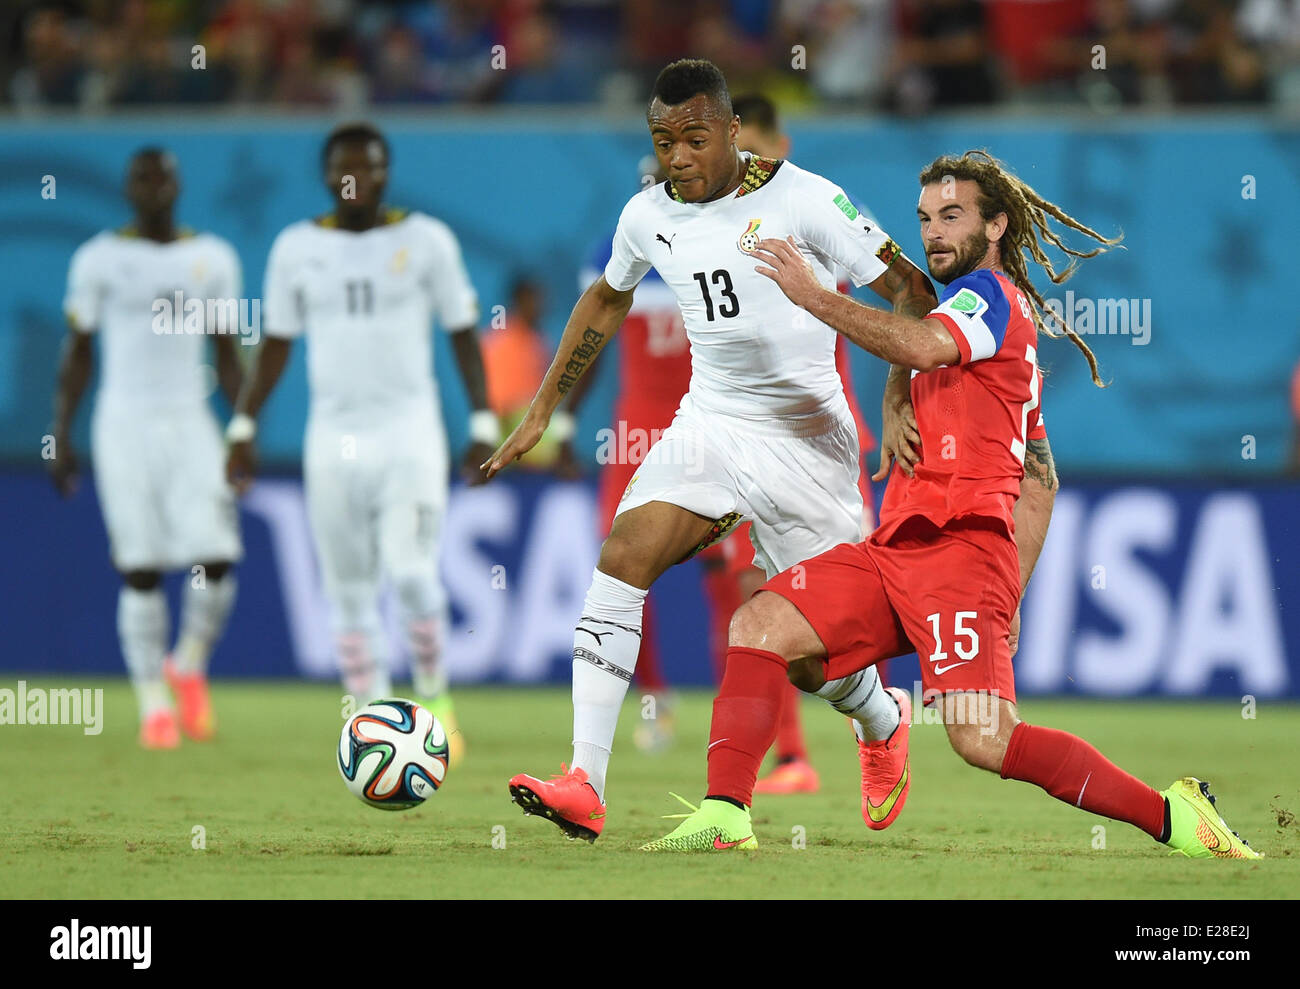 Natal, Brazil. 16th June, 2014. Kyle Beckerman (R) of USA in action against Jordan Ayew of Ghana during the FIFA World Cup 2014 group G preliminary round match between Ghana and the USA at the Estadio Arena das Dunas Stadium in Natal, Brazil, 16 June 2014. Credit:  dpa picture alliance/Alamy Live News Stock Photo